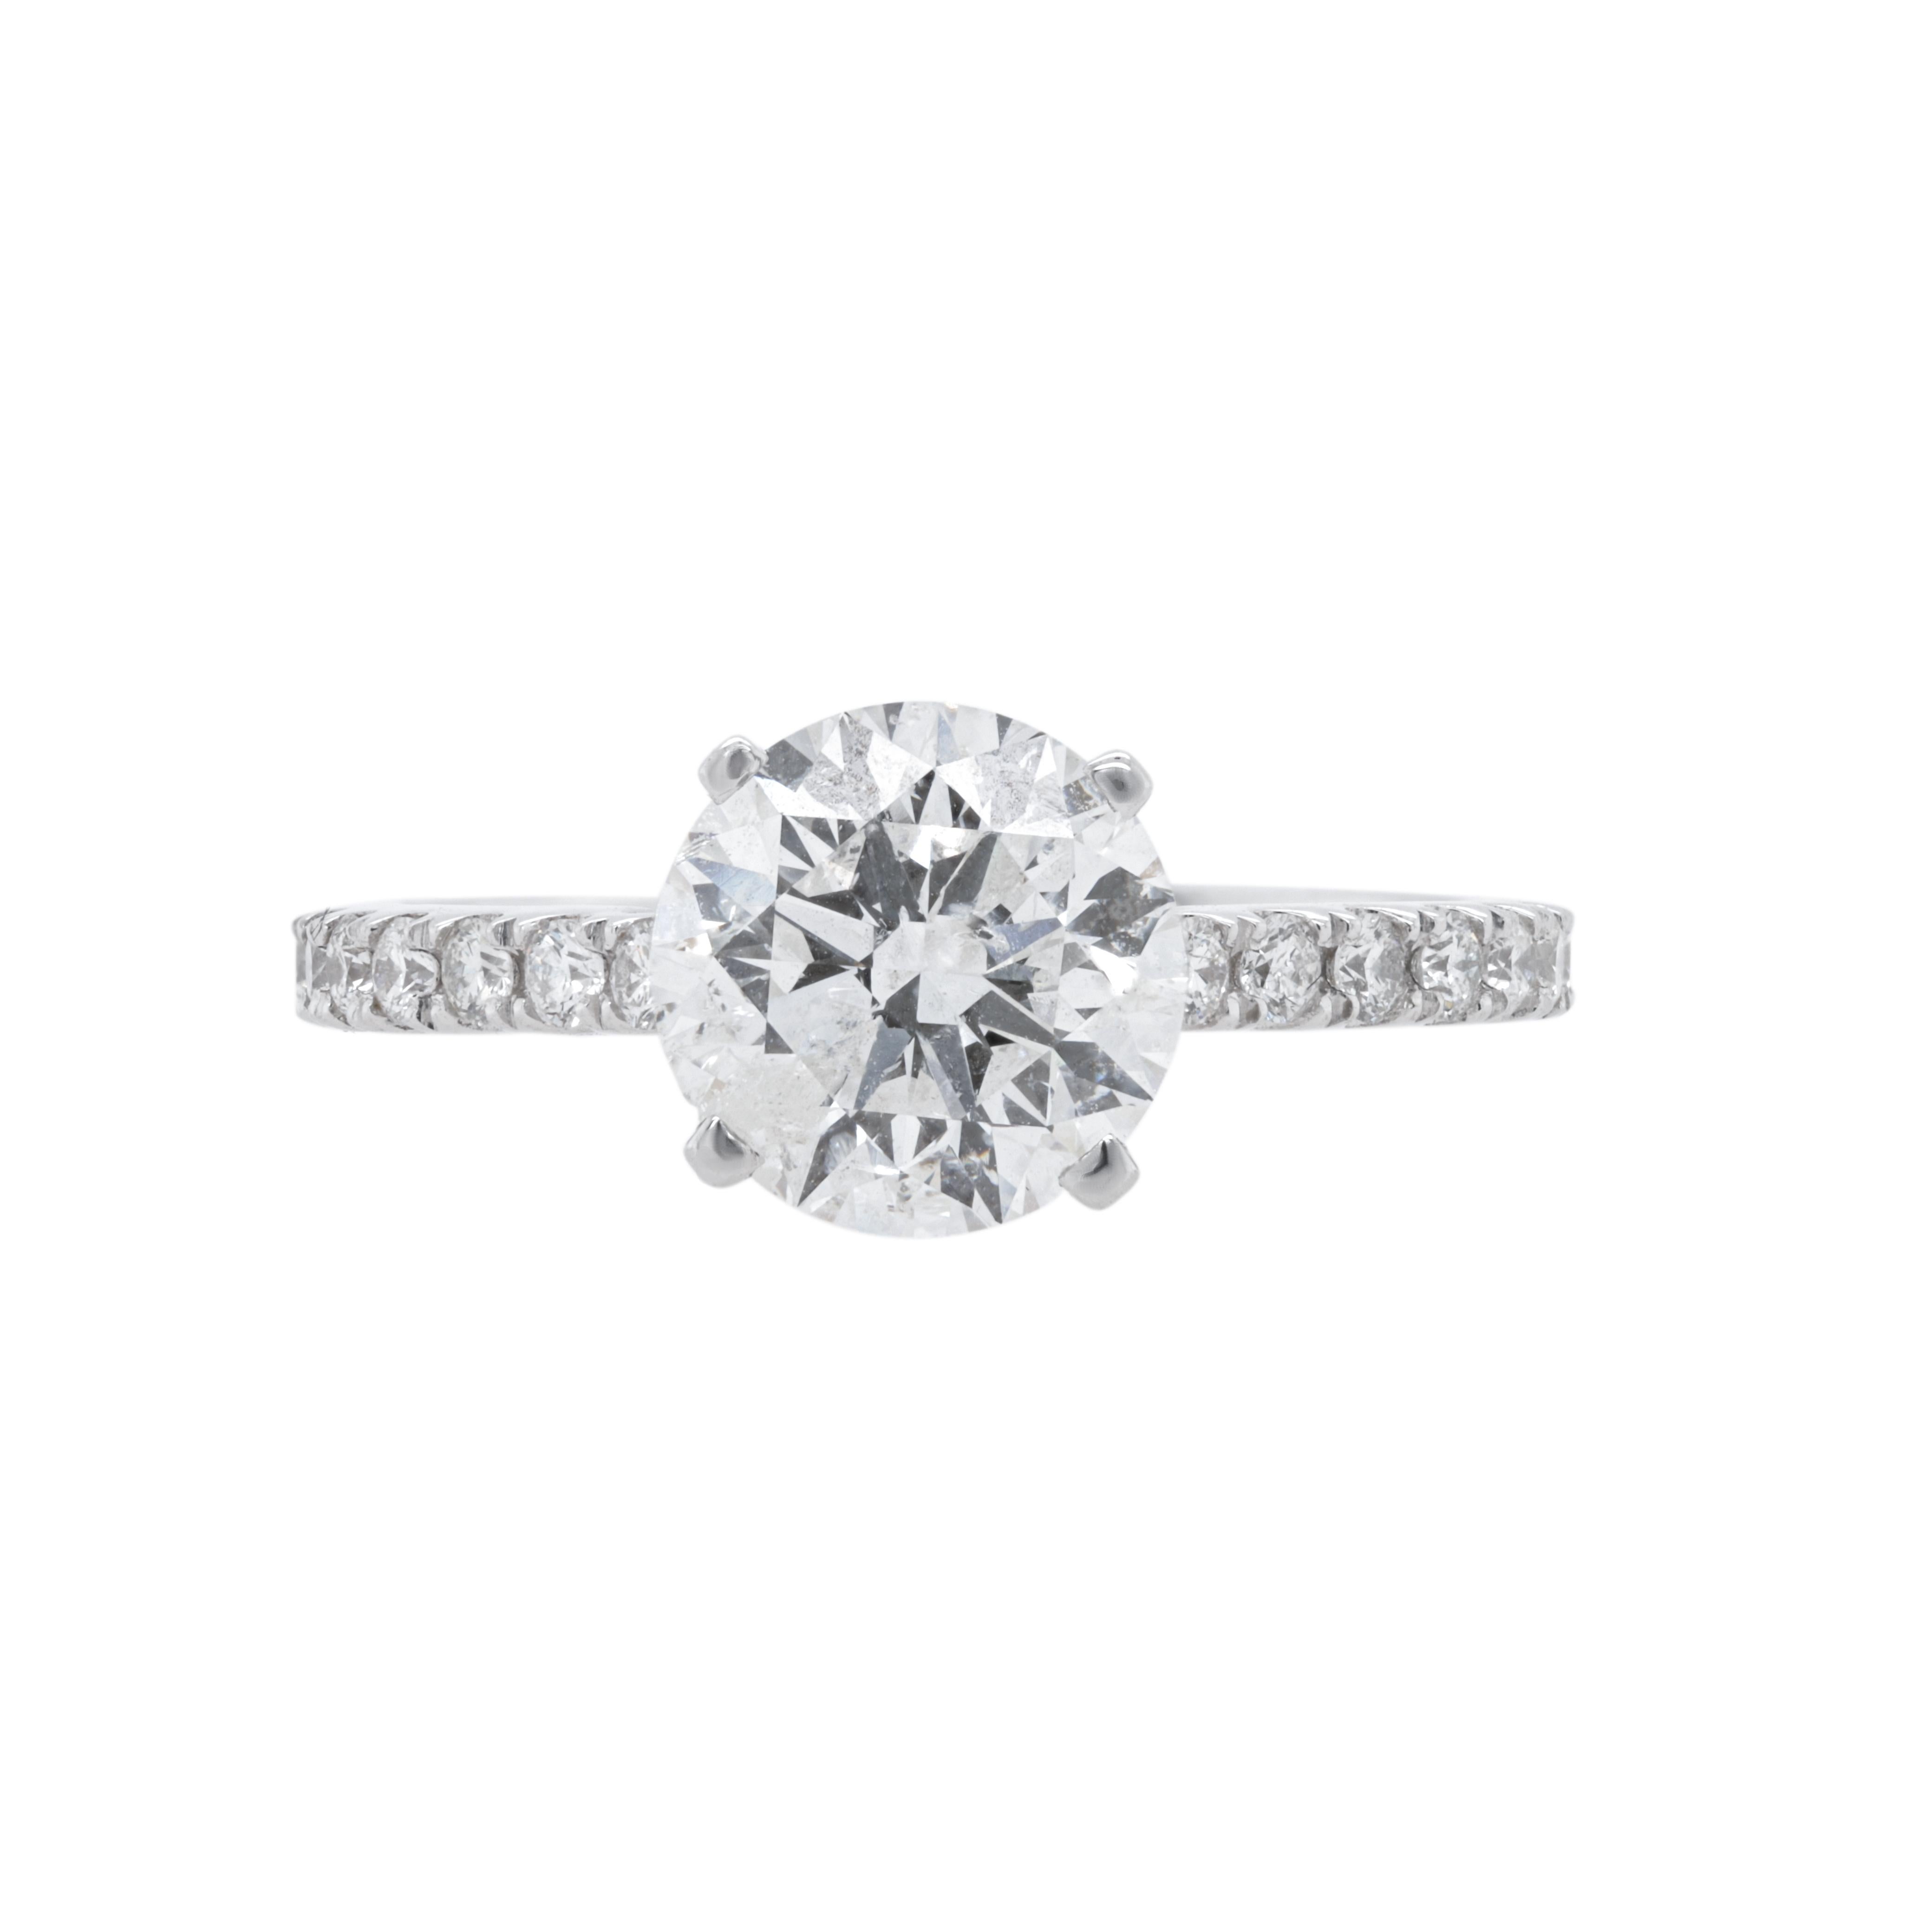 18ktwg engagement ring 2.00cts center stone with 0.60cts diamonds setting
